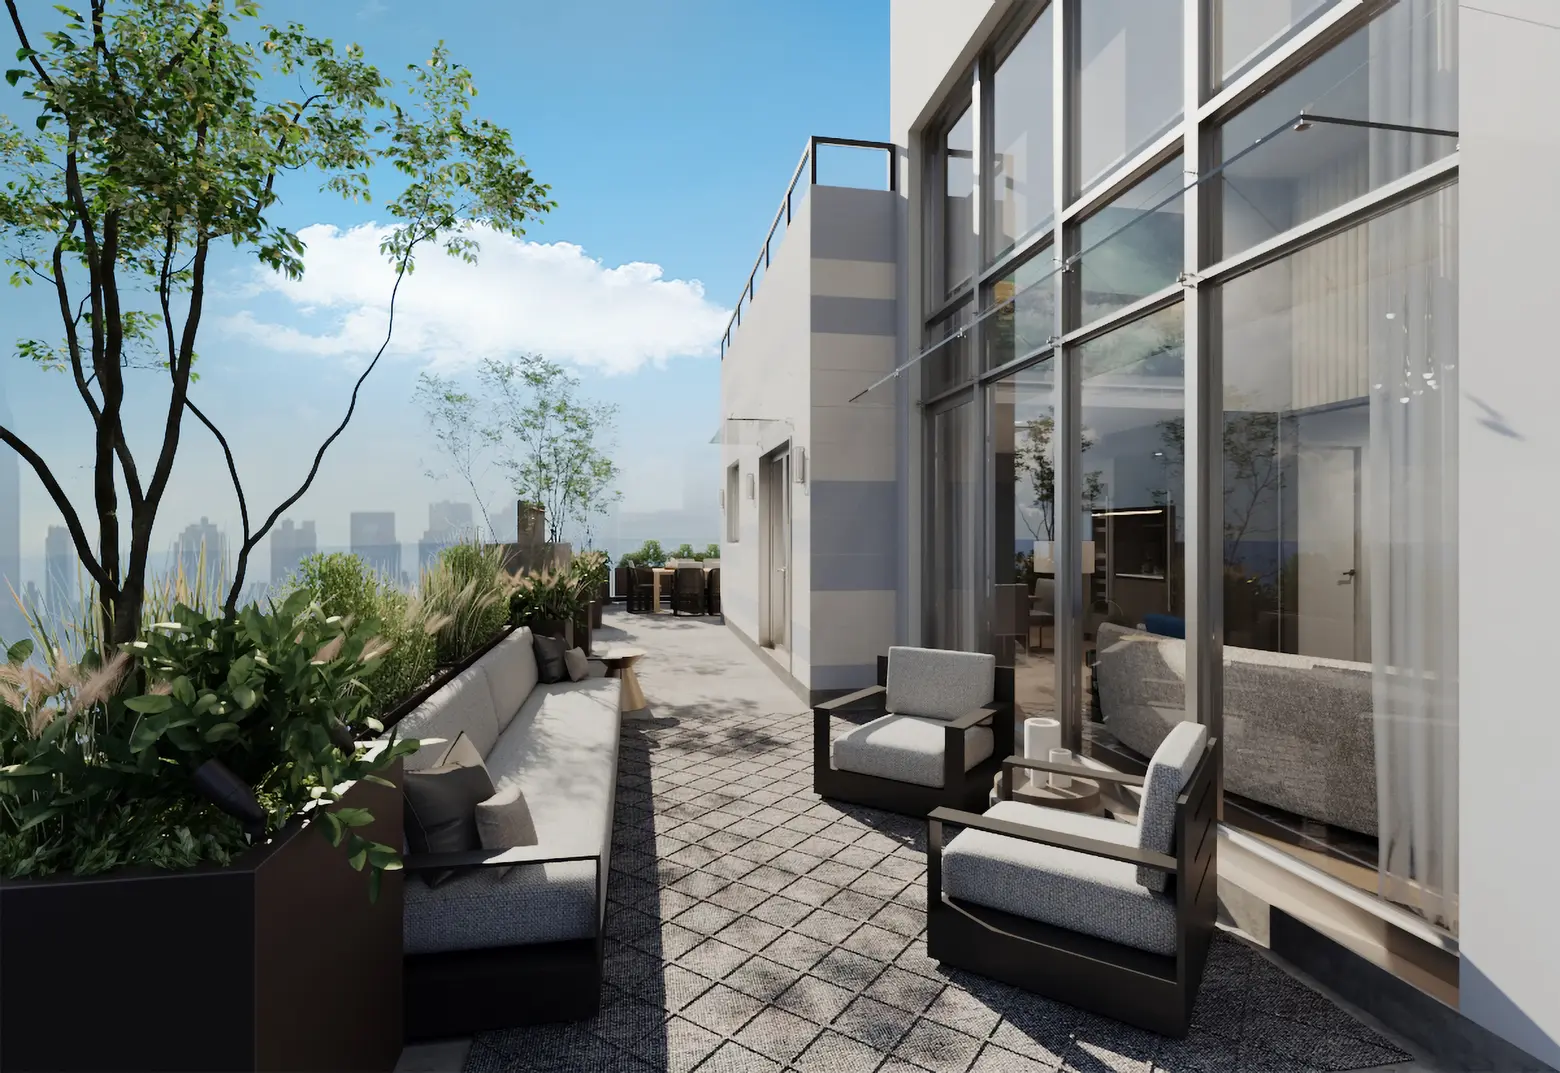 Apply for 23 mixed-income units at new luxury rental in Sunnyside, from $1,197/month